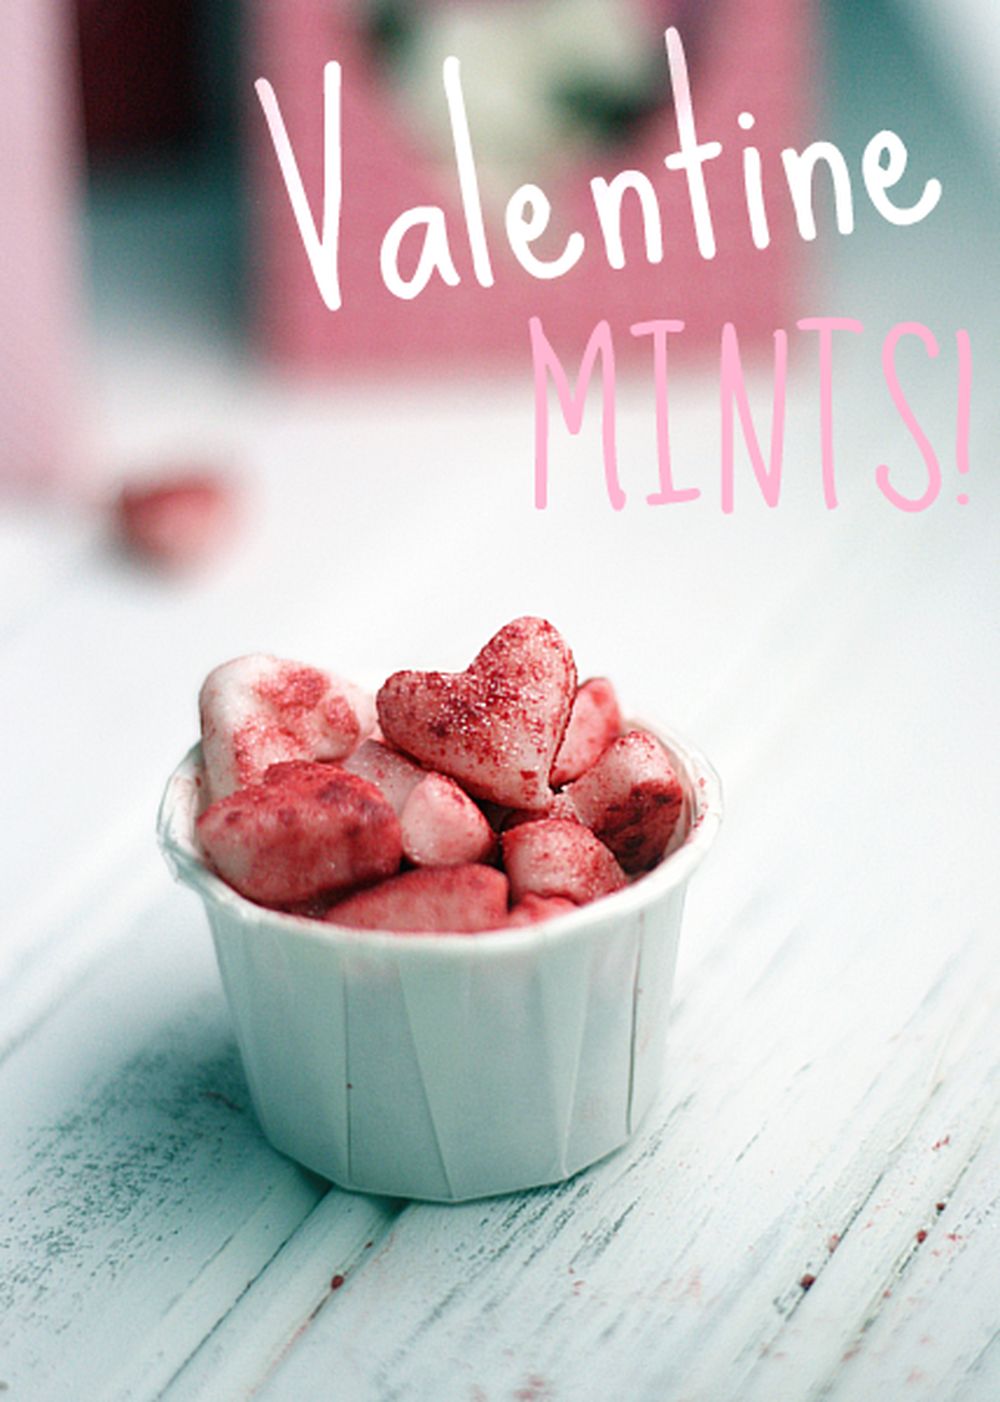 Homemade mints edible valentine's day gifts